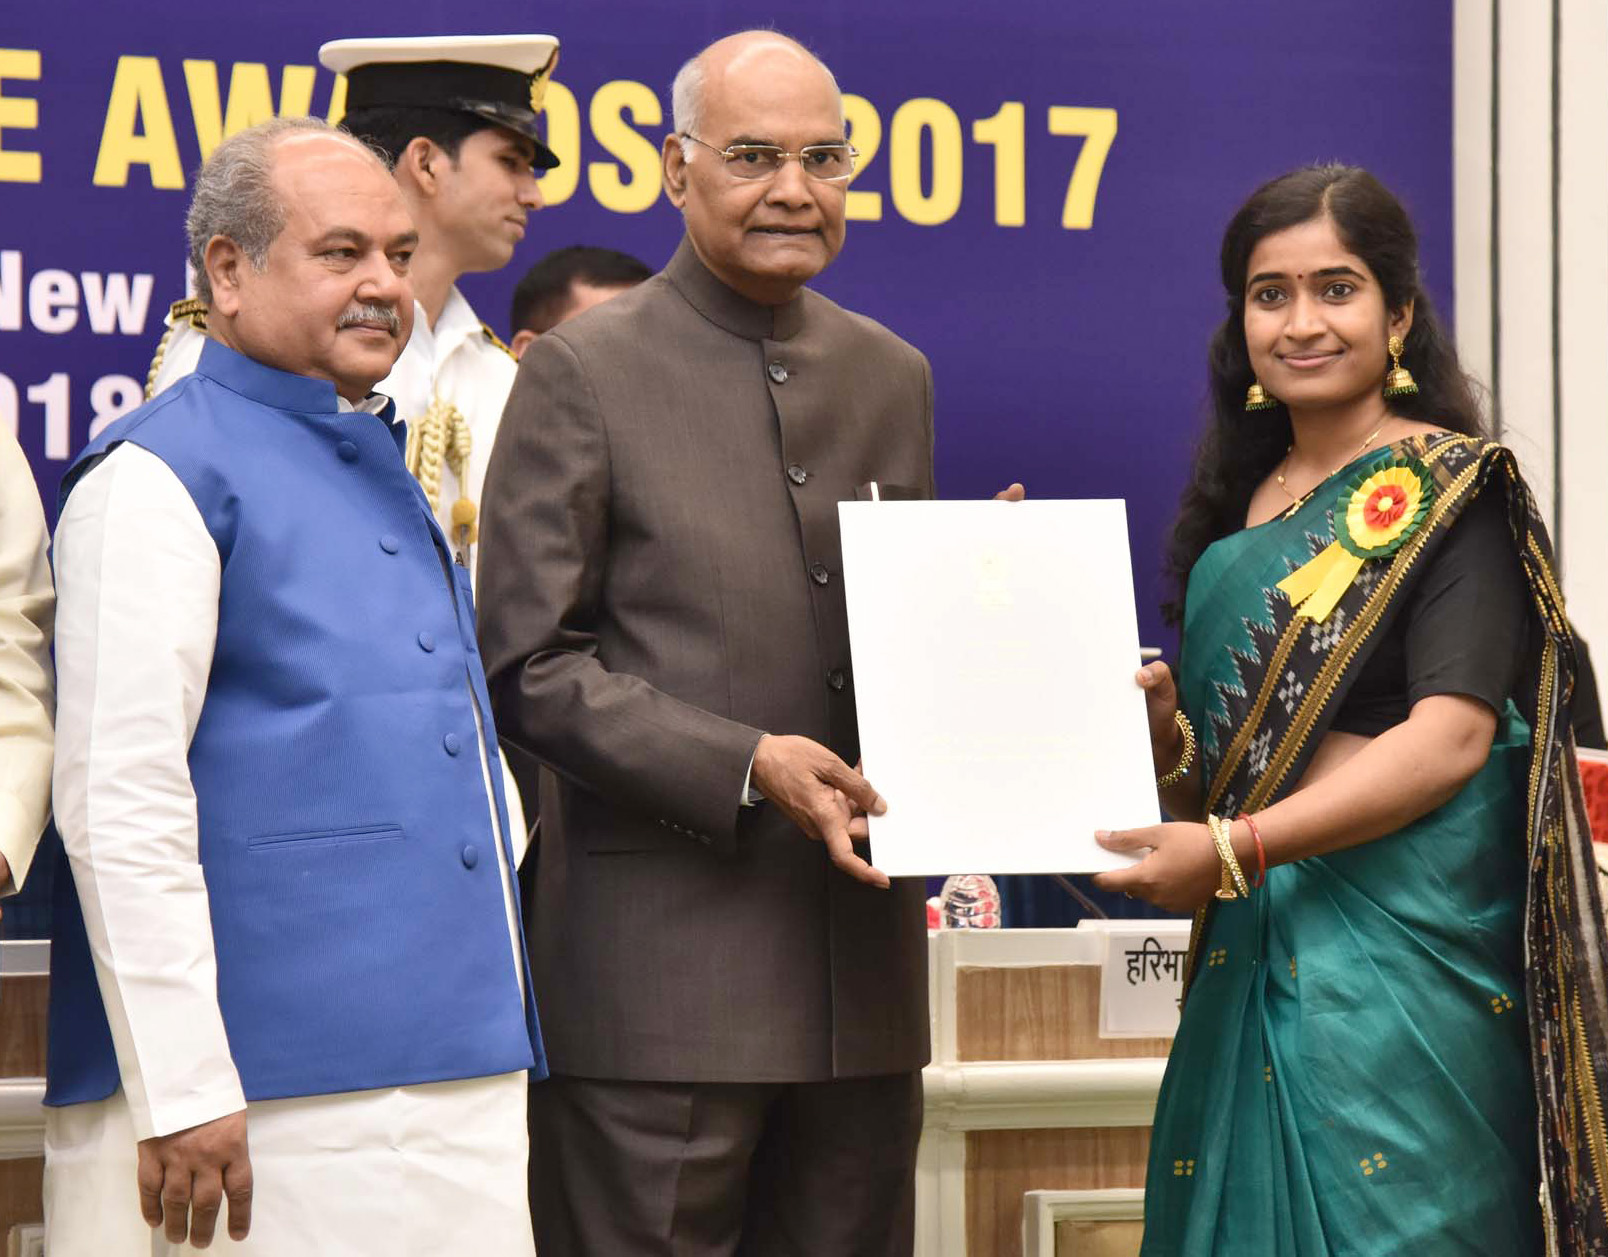 The President, Shri Ram Nath Kovind presenting the National Geoscience Awards 2017, at a function, in New Delhi on May 16, 2018. The Union Minister for Rural Development, Panchayati Raj and Mines, Shri Narendra Singh Tomar is also seen.